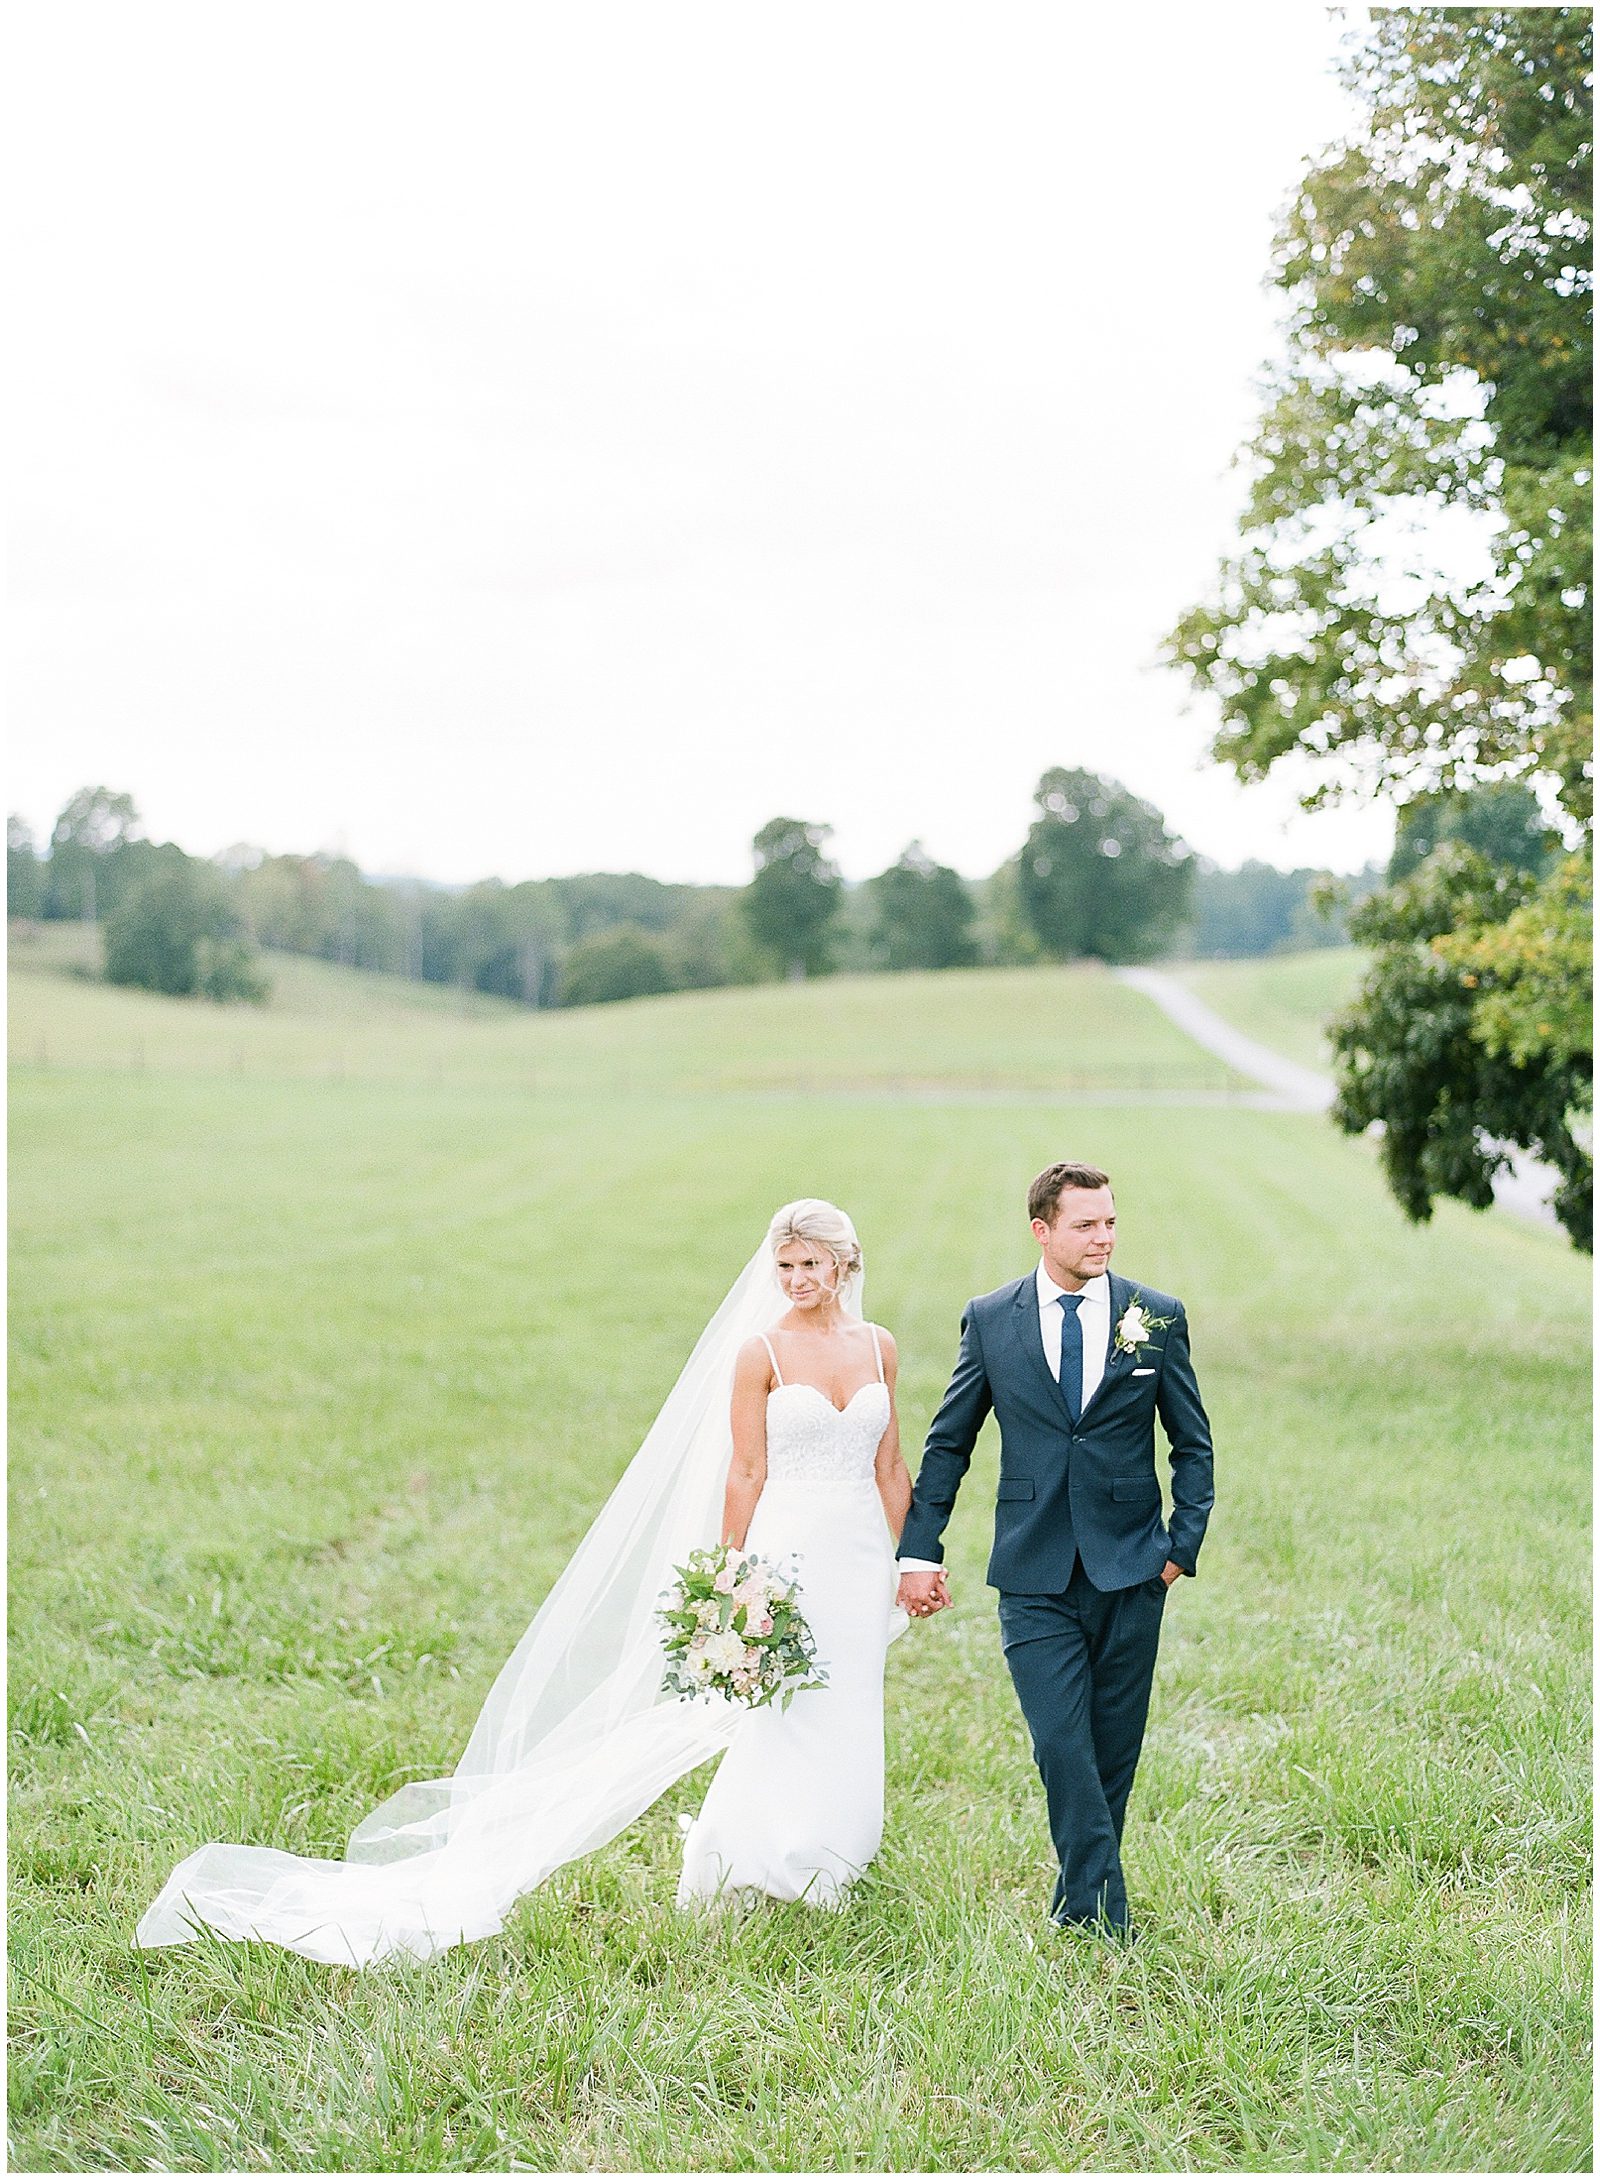 Bride and Groom Holding Hands in Field Photo